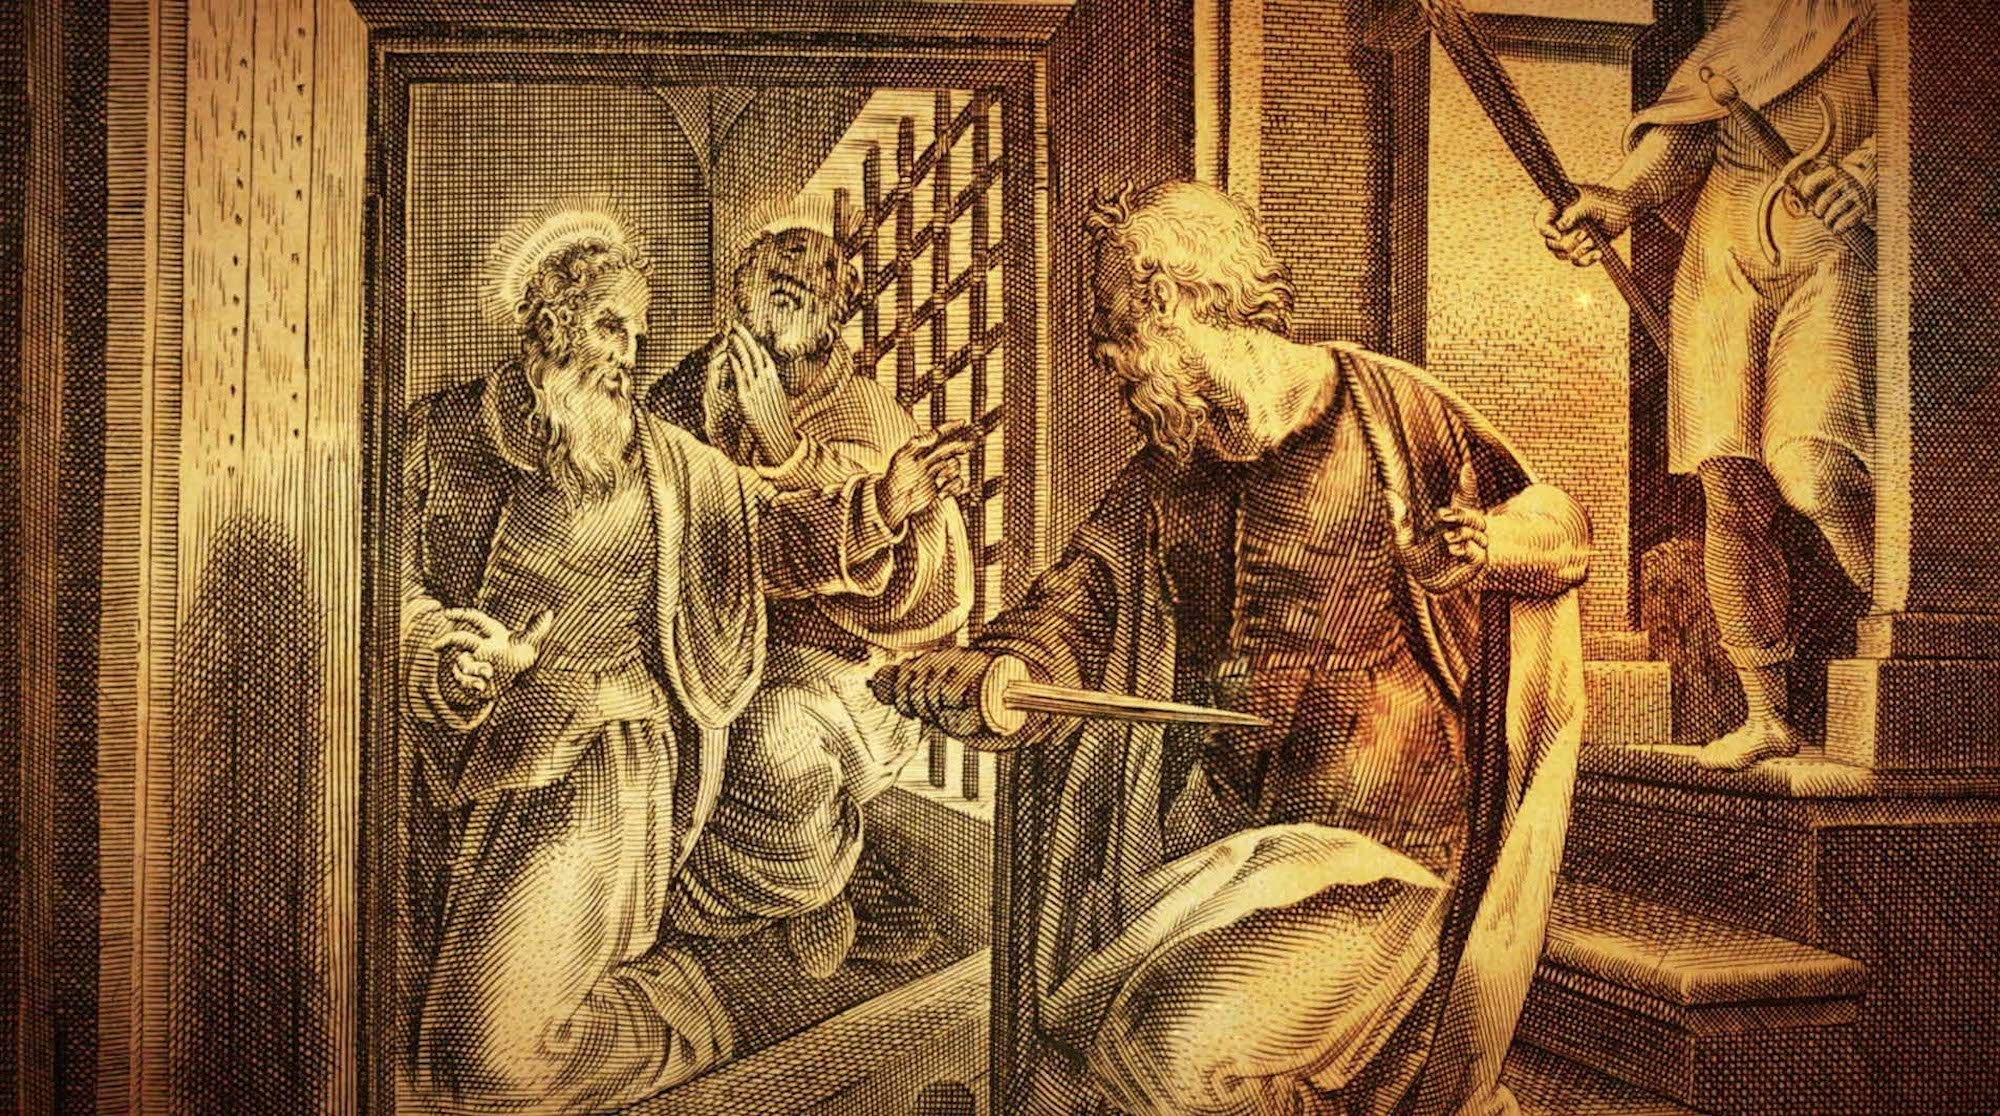 Paul and Silas in Prison at Philippi